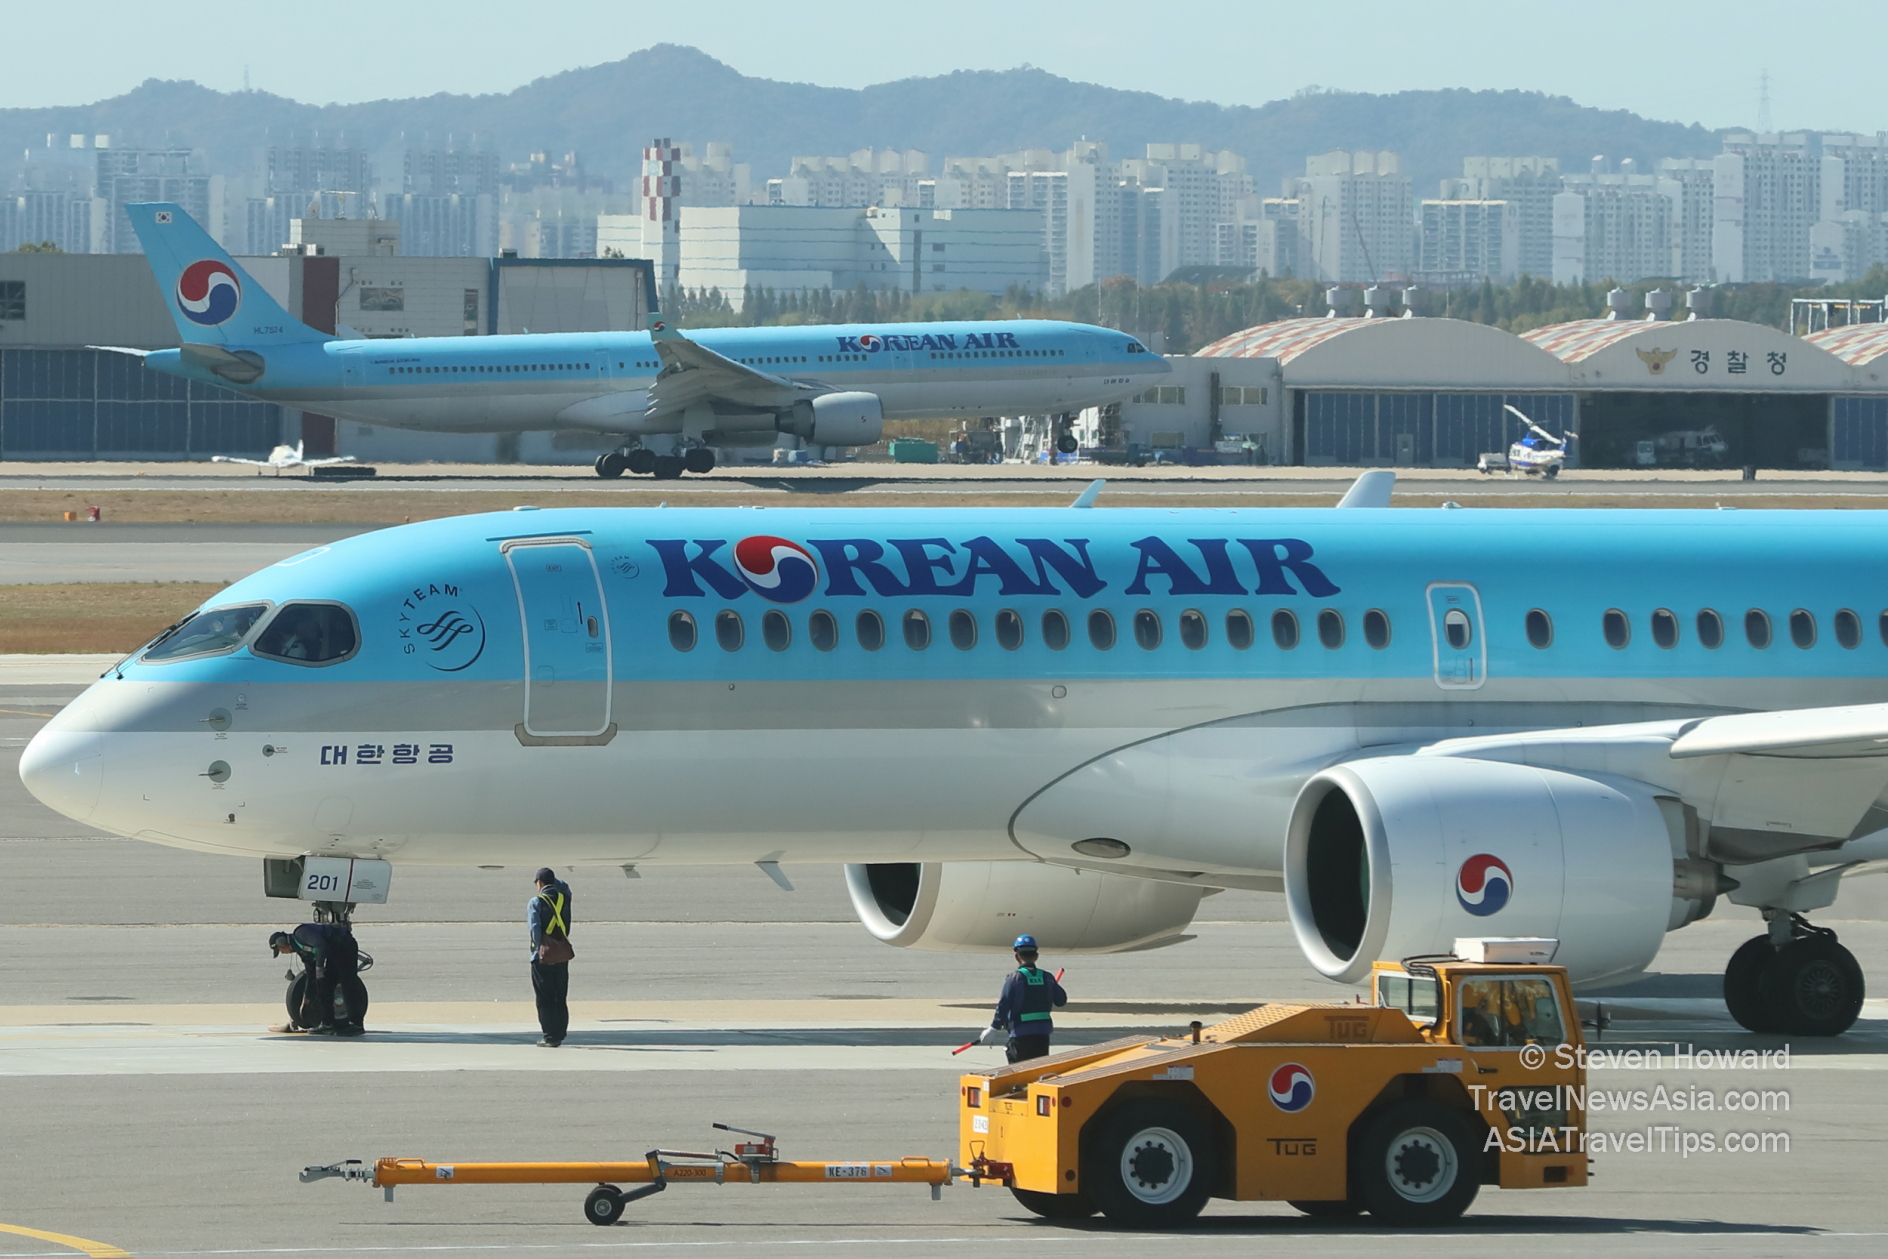 Korean Air A220-300 in the foreground with an A330 taking off in the background. Picture by Steven Howard of TravelNewsAsia.com Click to enlarge.